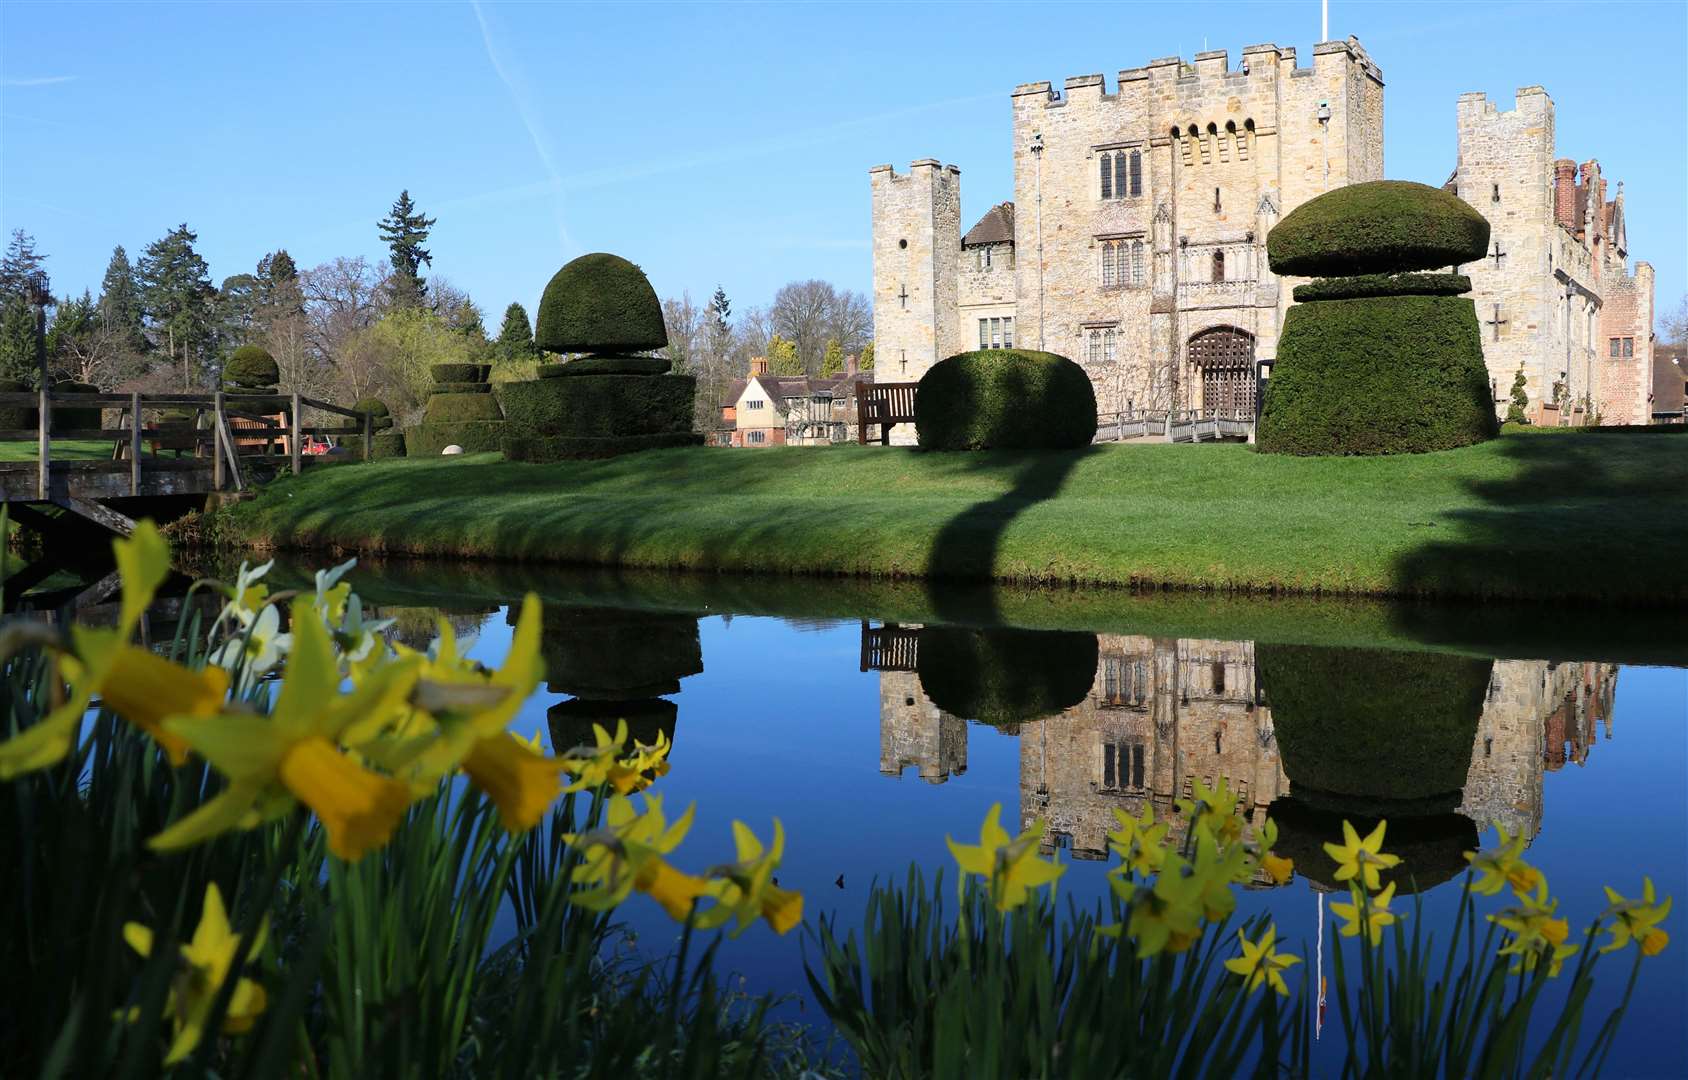 Henry VIII's second wife and mother of Queen Elizabeth I, Anne Boleyn, grew up in Kent’s Hever Castle